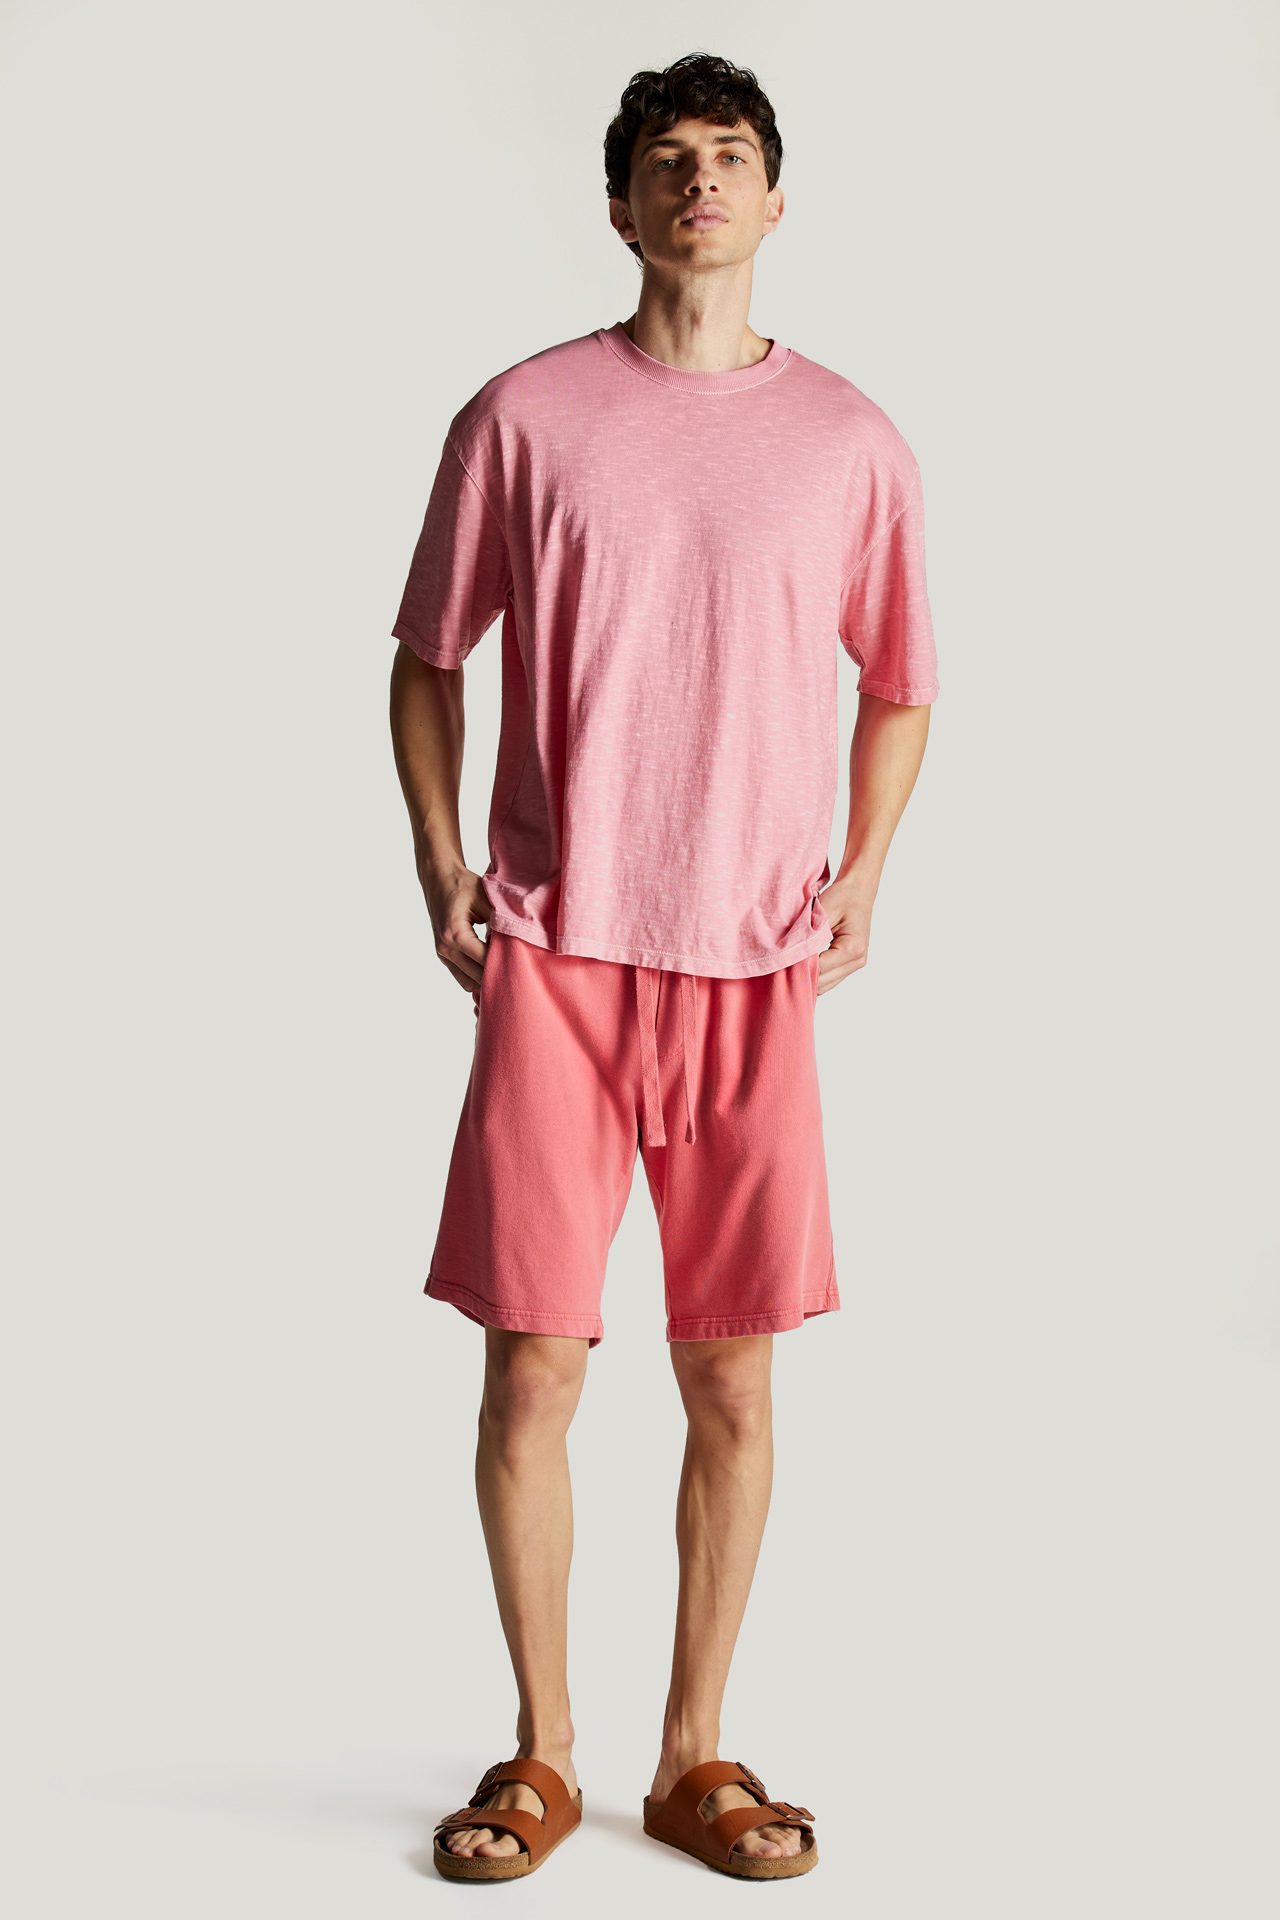 Classic Relaxed Bermuda